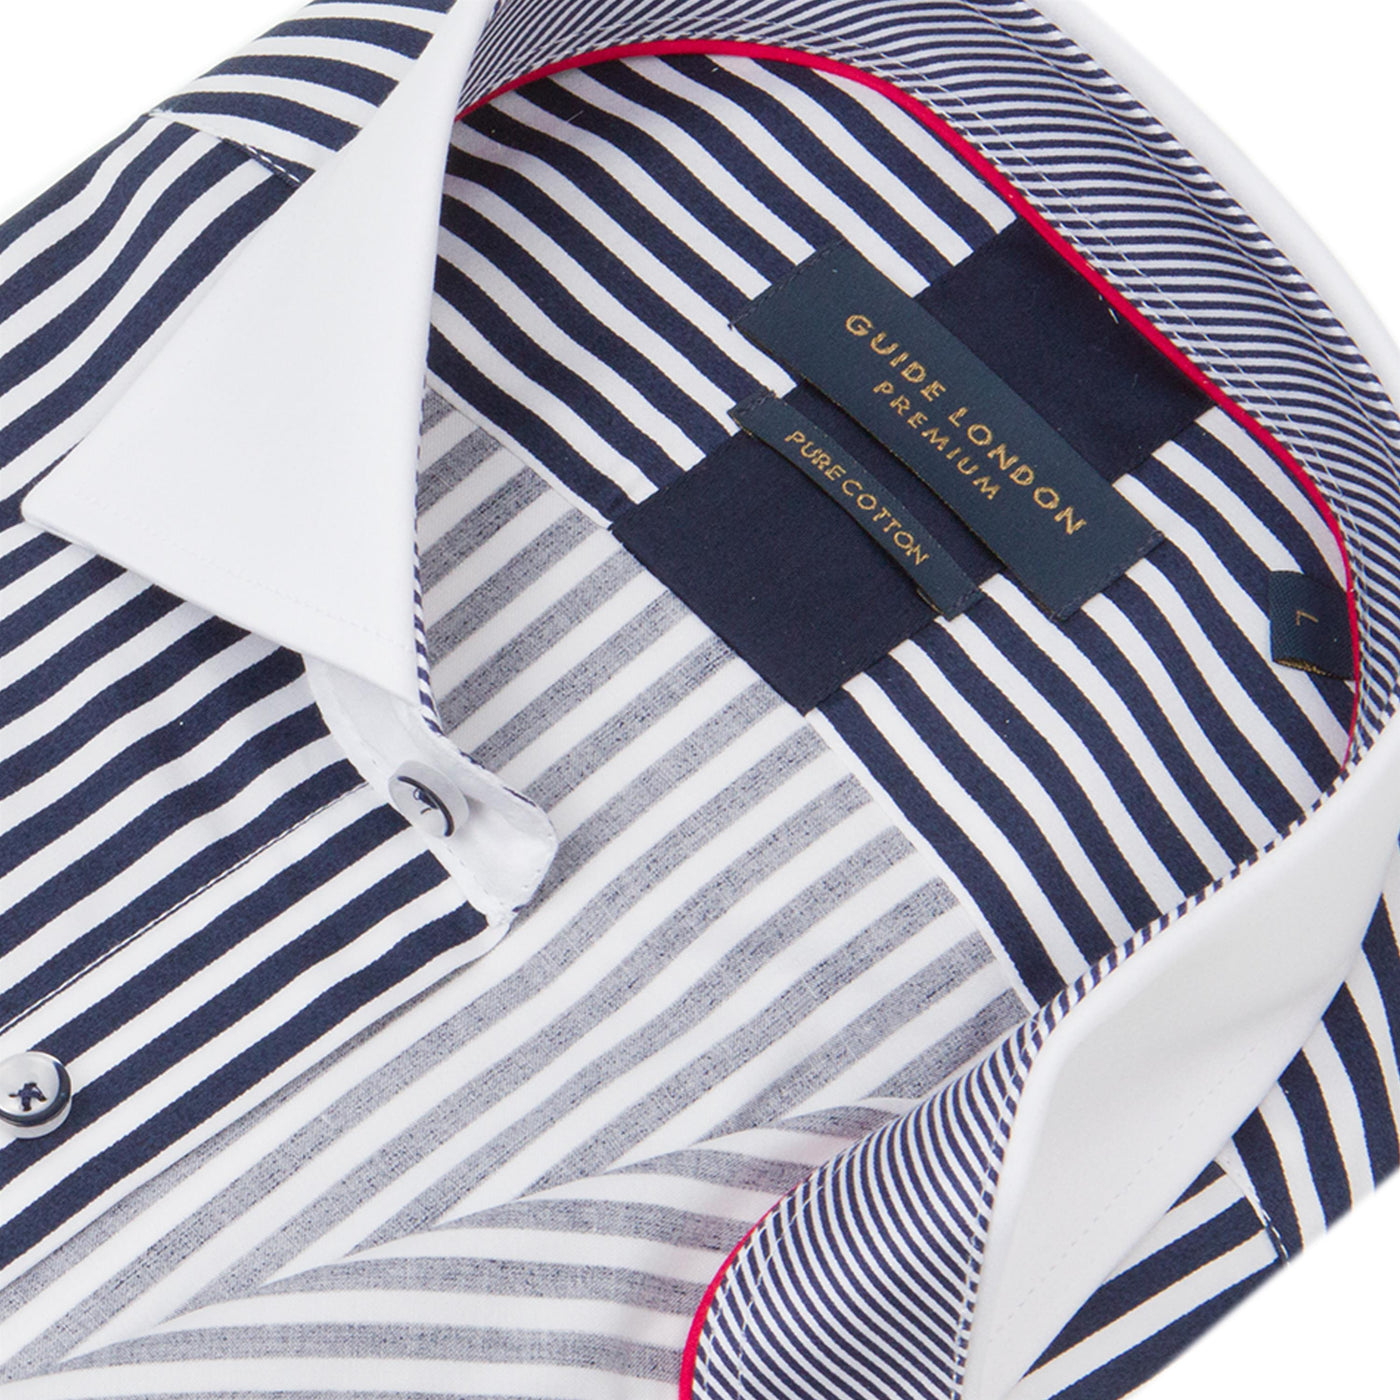 Long Sleeve White Collared Navy Striped Print Shirt